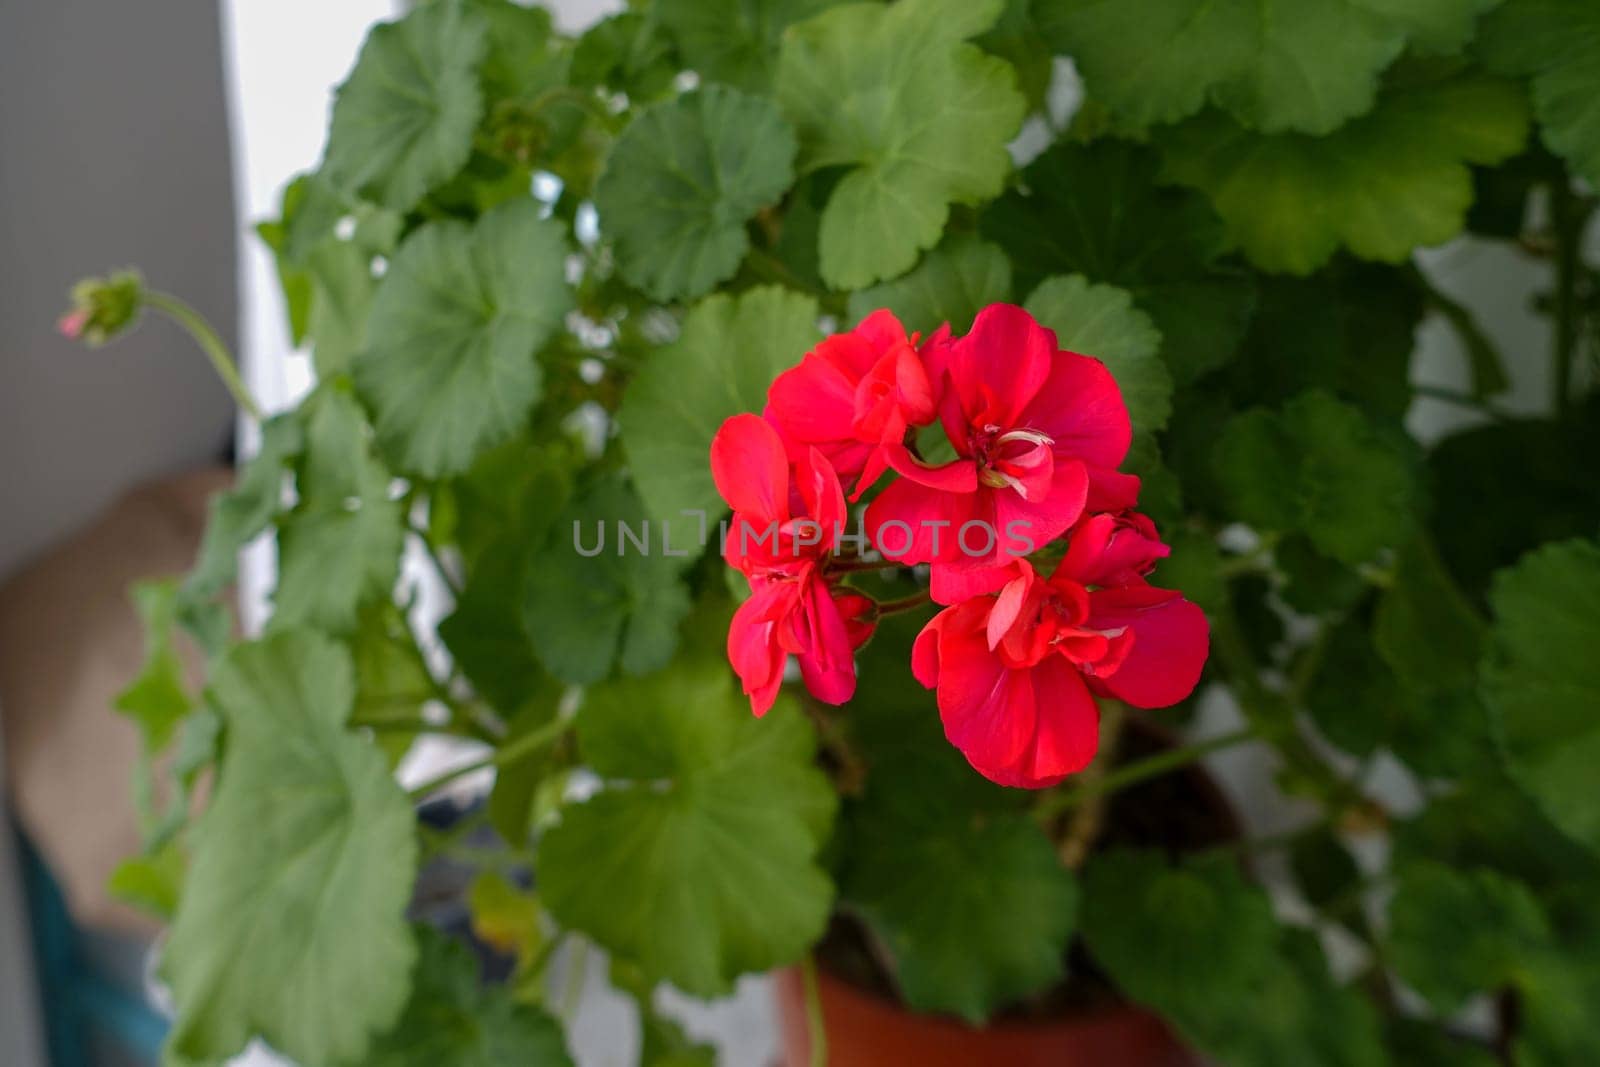 Geranium flower, in the window of a house, interest in flowers, women growing flowers at home,